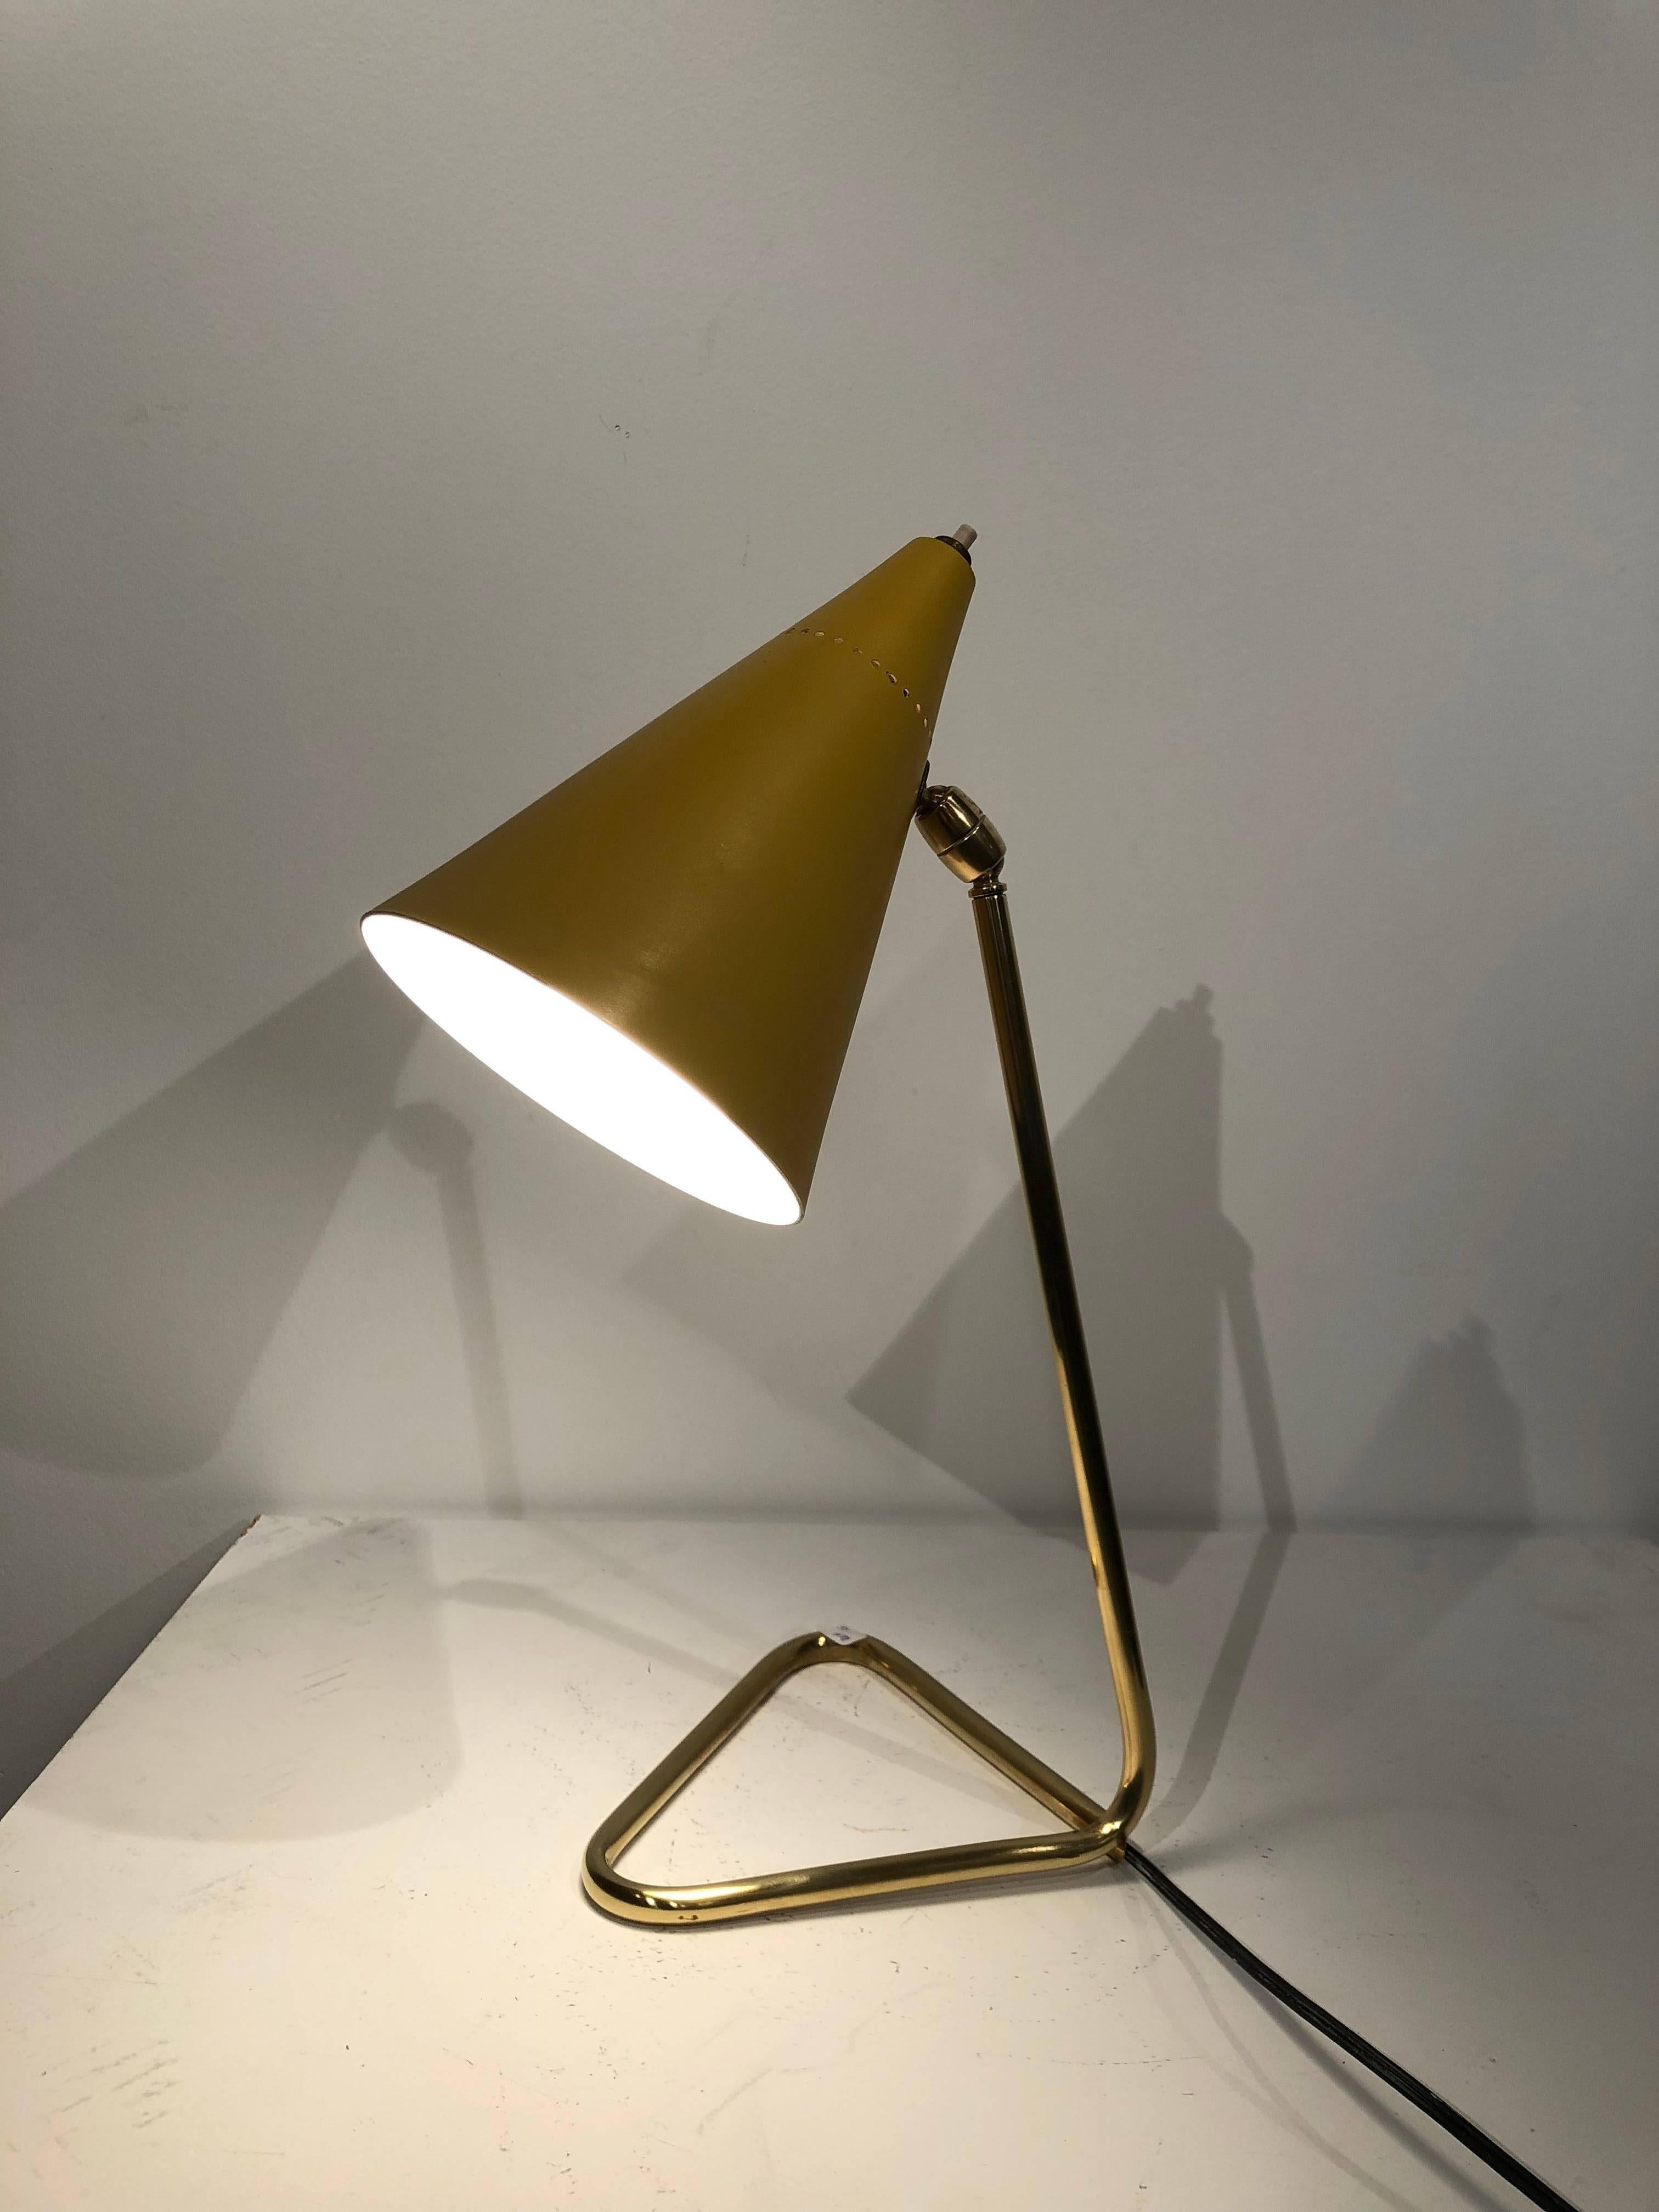 Table lamp in brass and yellow lacquered shade.
Good original condition with minor scratches on the shade (see picture)
design by Gino Sarfatti.